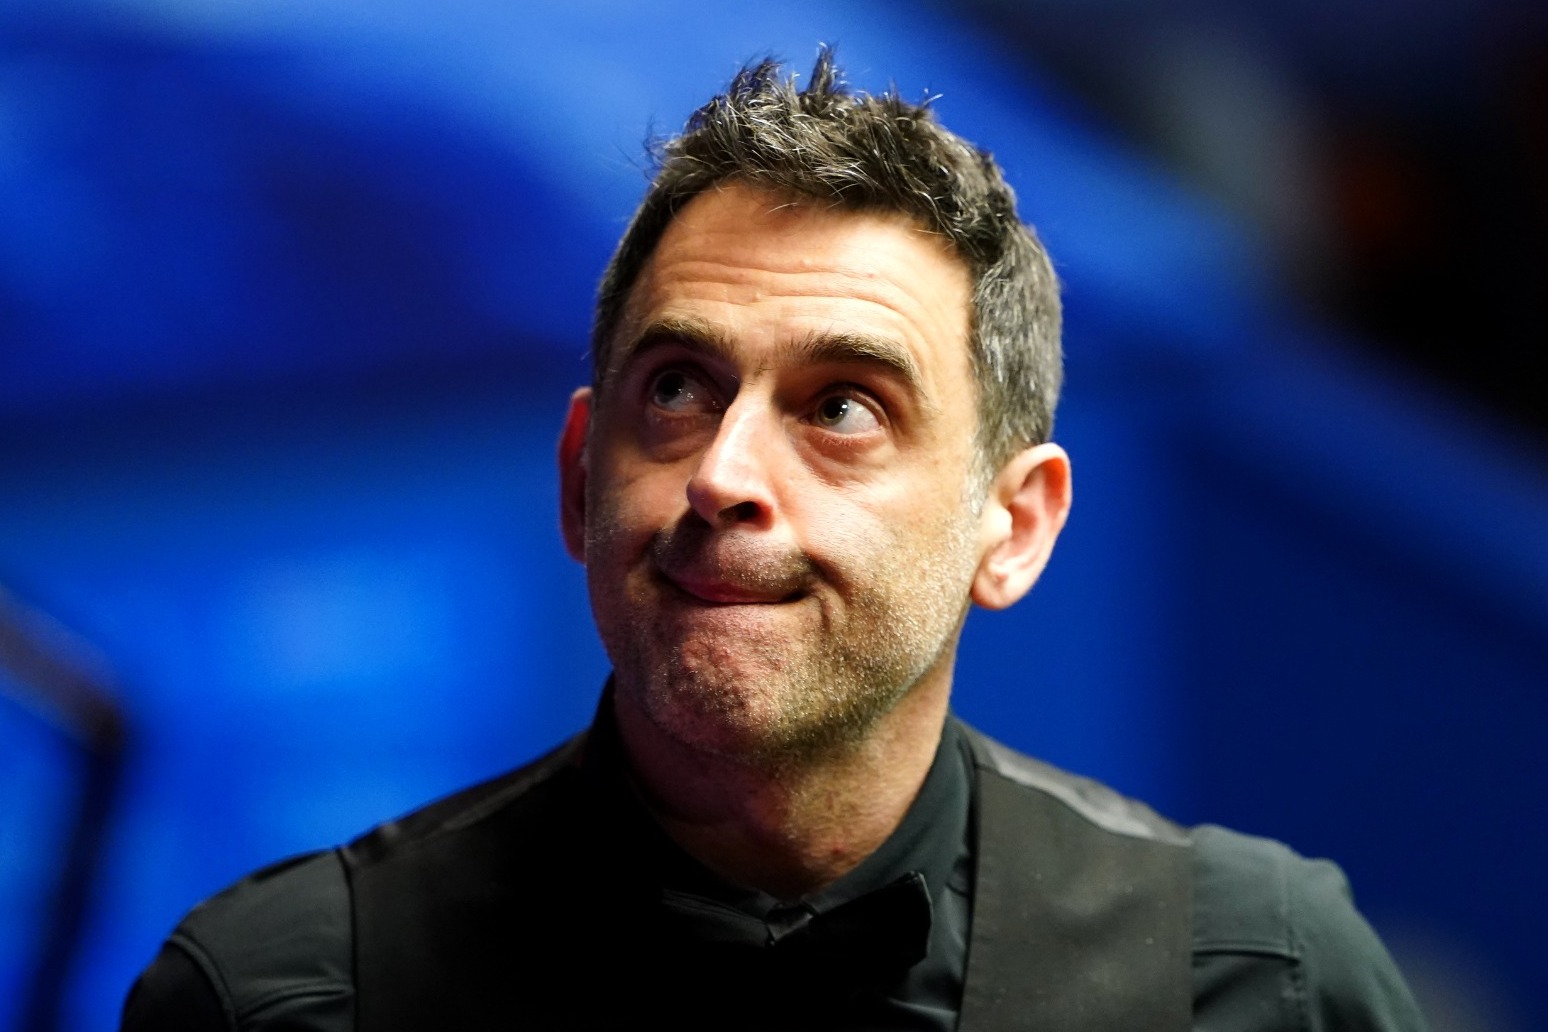 Ronnie O’Sullivan could be sanctioned after appearing to make lewd gesture 